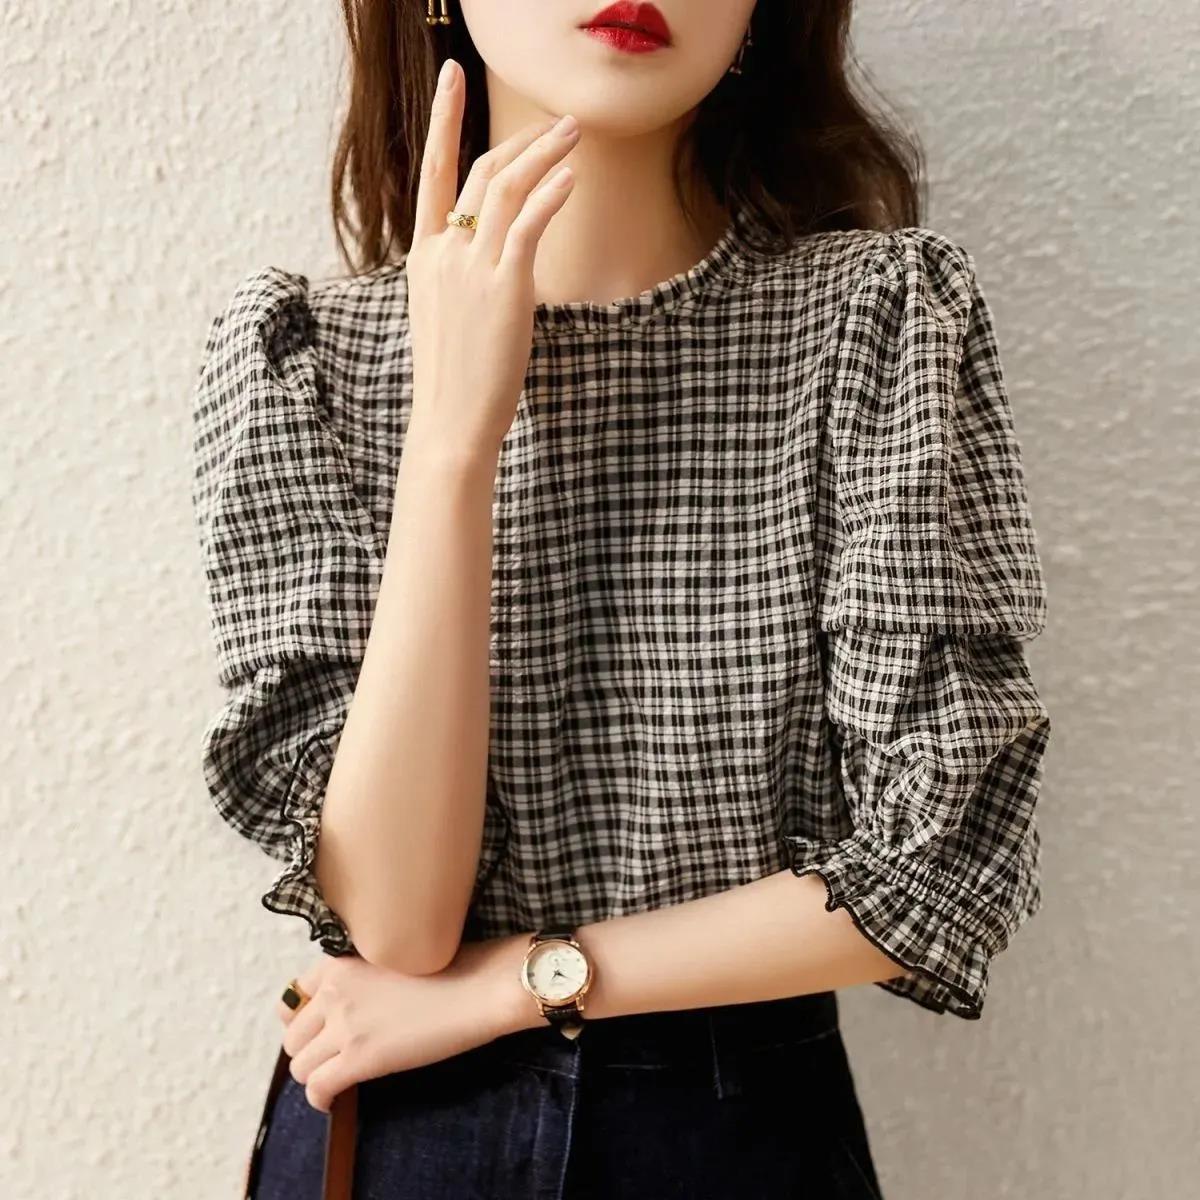 Spring and summer new Korean fashion versatile show thin black and white check pattern bottomed shirt western style 5-sleeve shirt women's trend